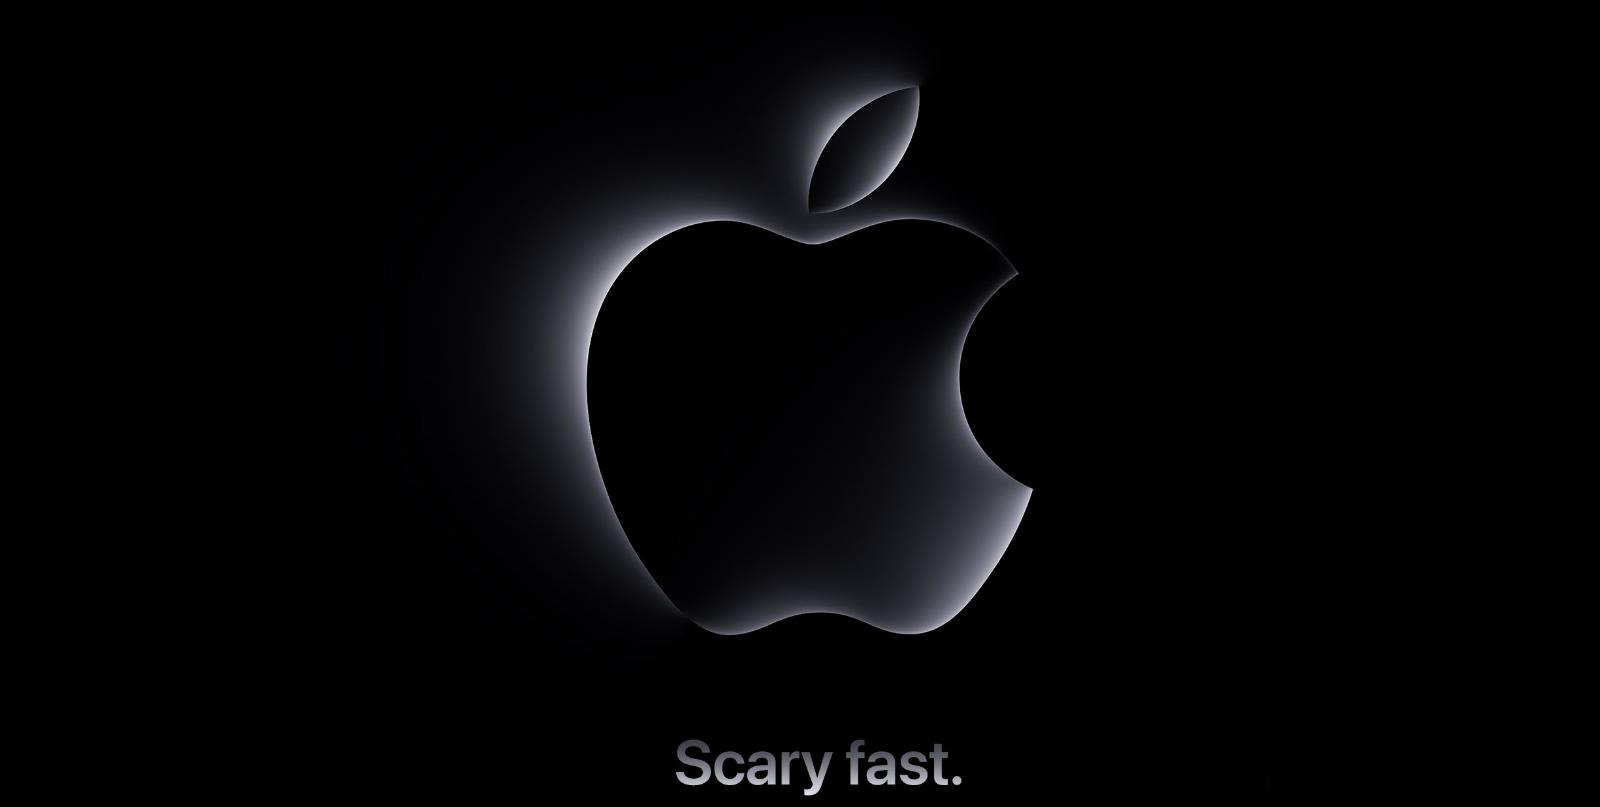 Apple sends out invites for ‘Scary Fast’ event – new Macs could be on the menu